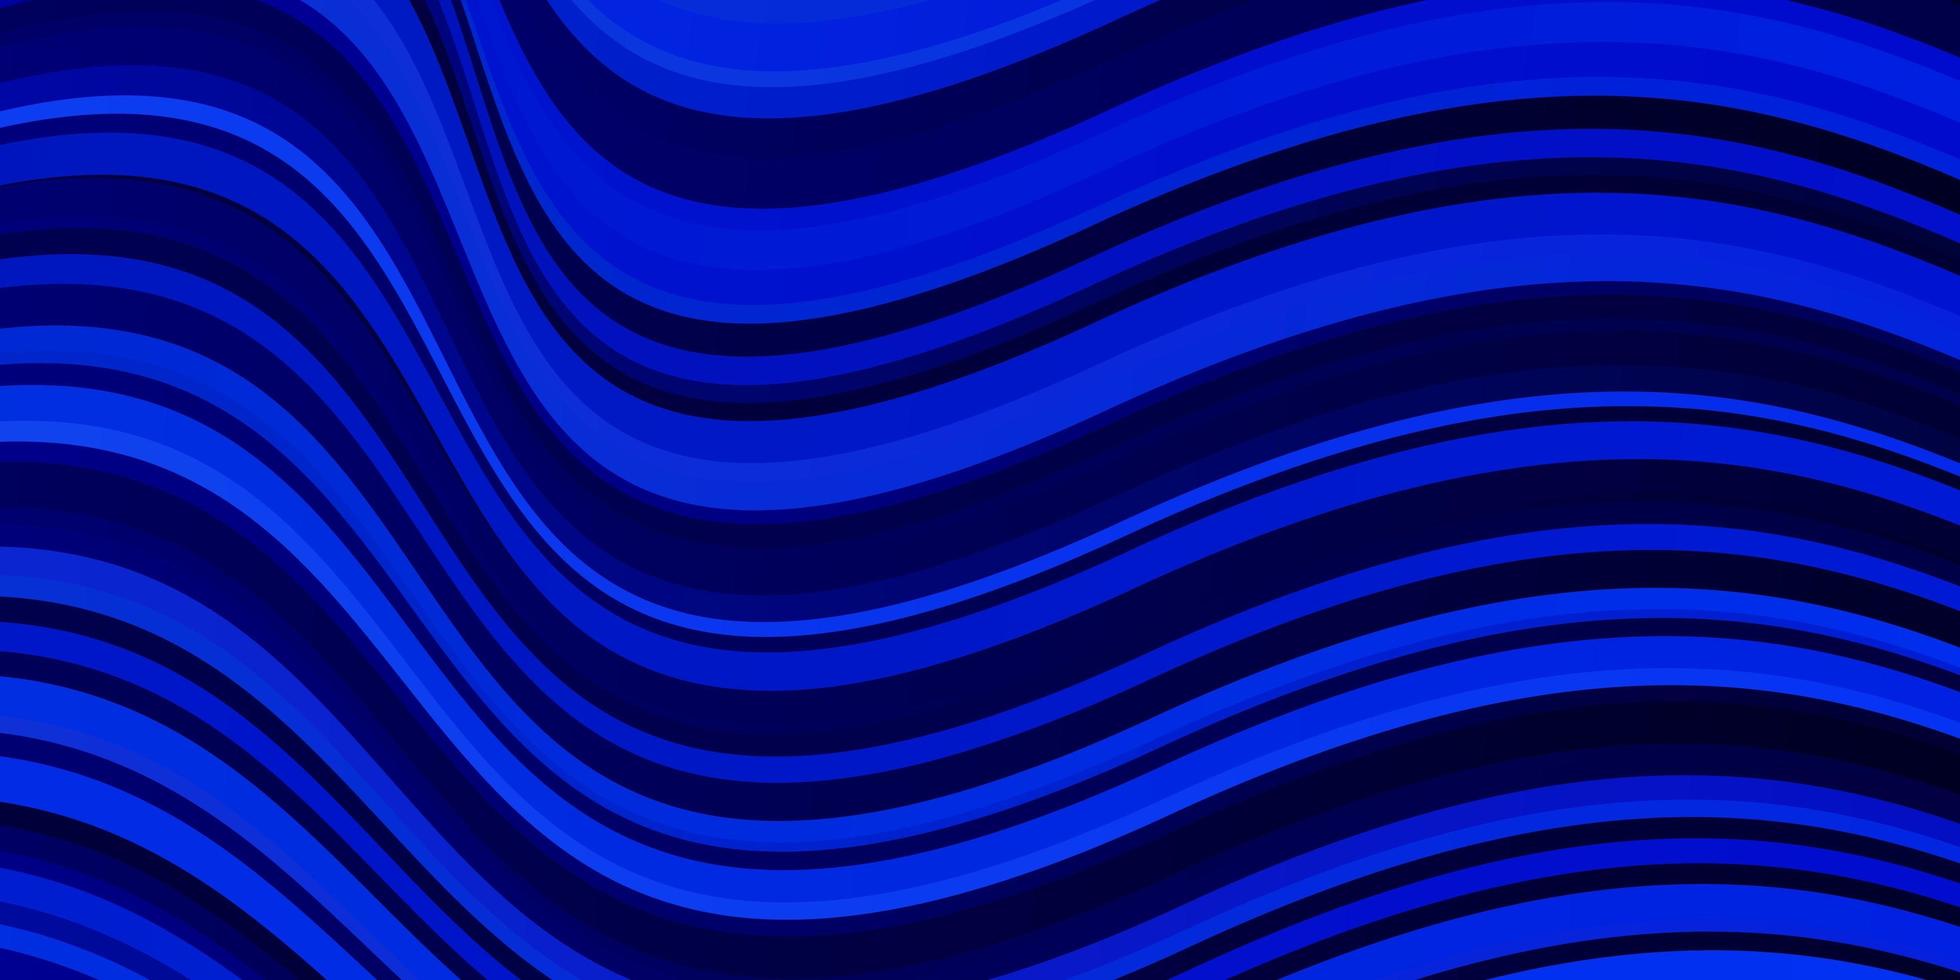 Dark BLUE vector background with curves. Abstract illustration with gradient bows. Pattern for websites, landing pages.